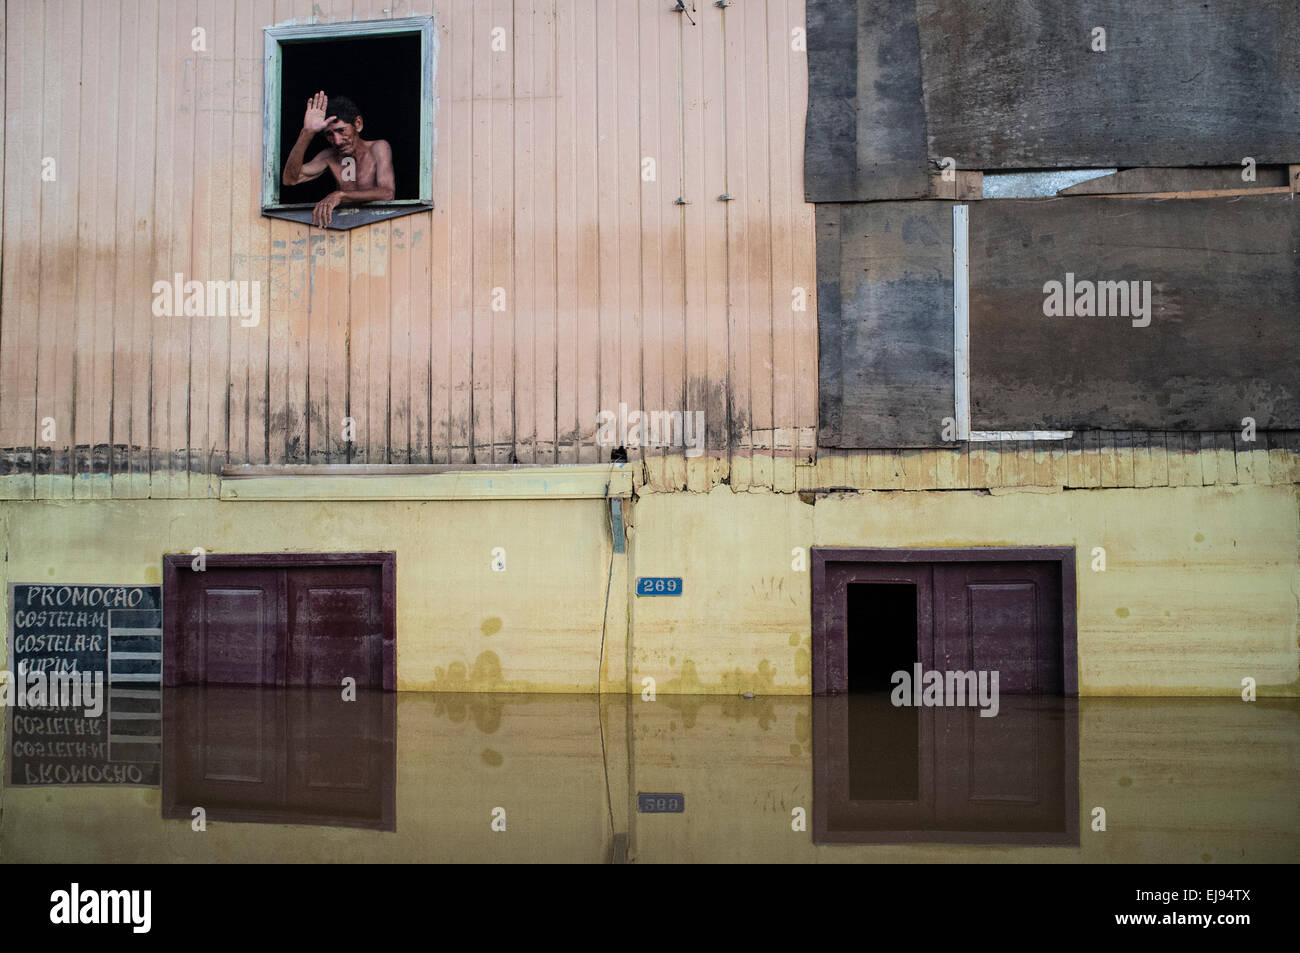 Flood Line High Resolution Stock Photography and Images - Alamy